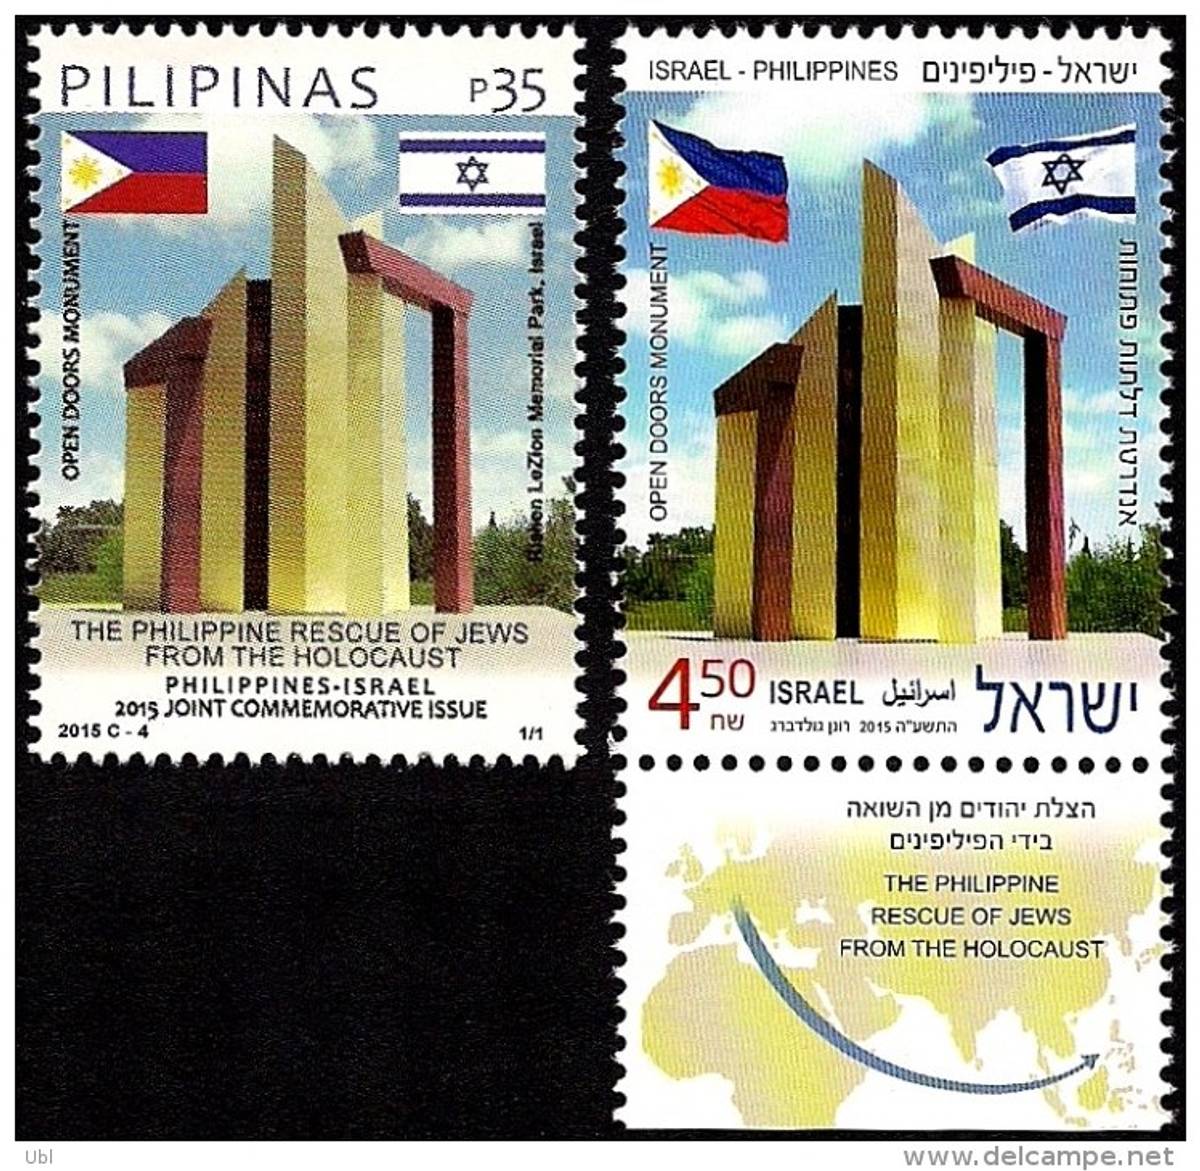 Philippino and the Israeli stamps commemorating the Philippines rescue of Jewish refugees from the Holocaust during World War II. The stamps depict the “Open Doors” monument at the “Memorial Park” in Rishon Le-Zion which was erected to commemorate the Philippines rescue of Jews. 